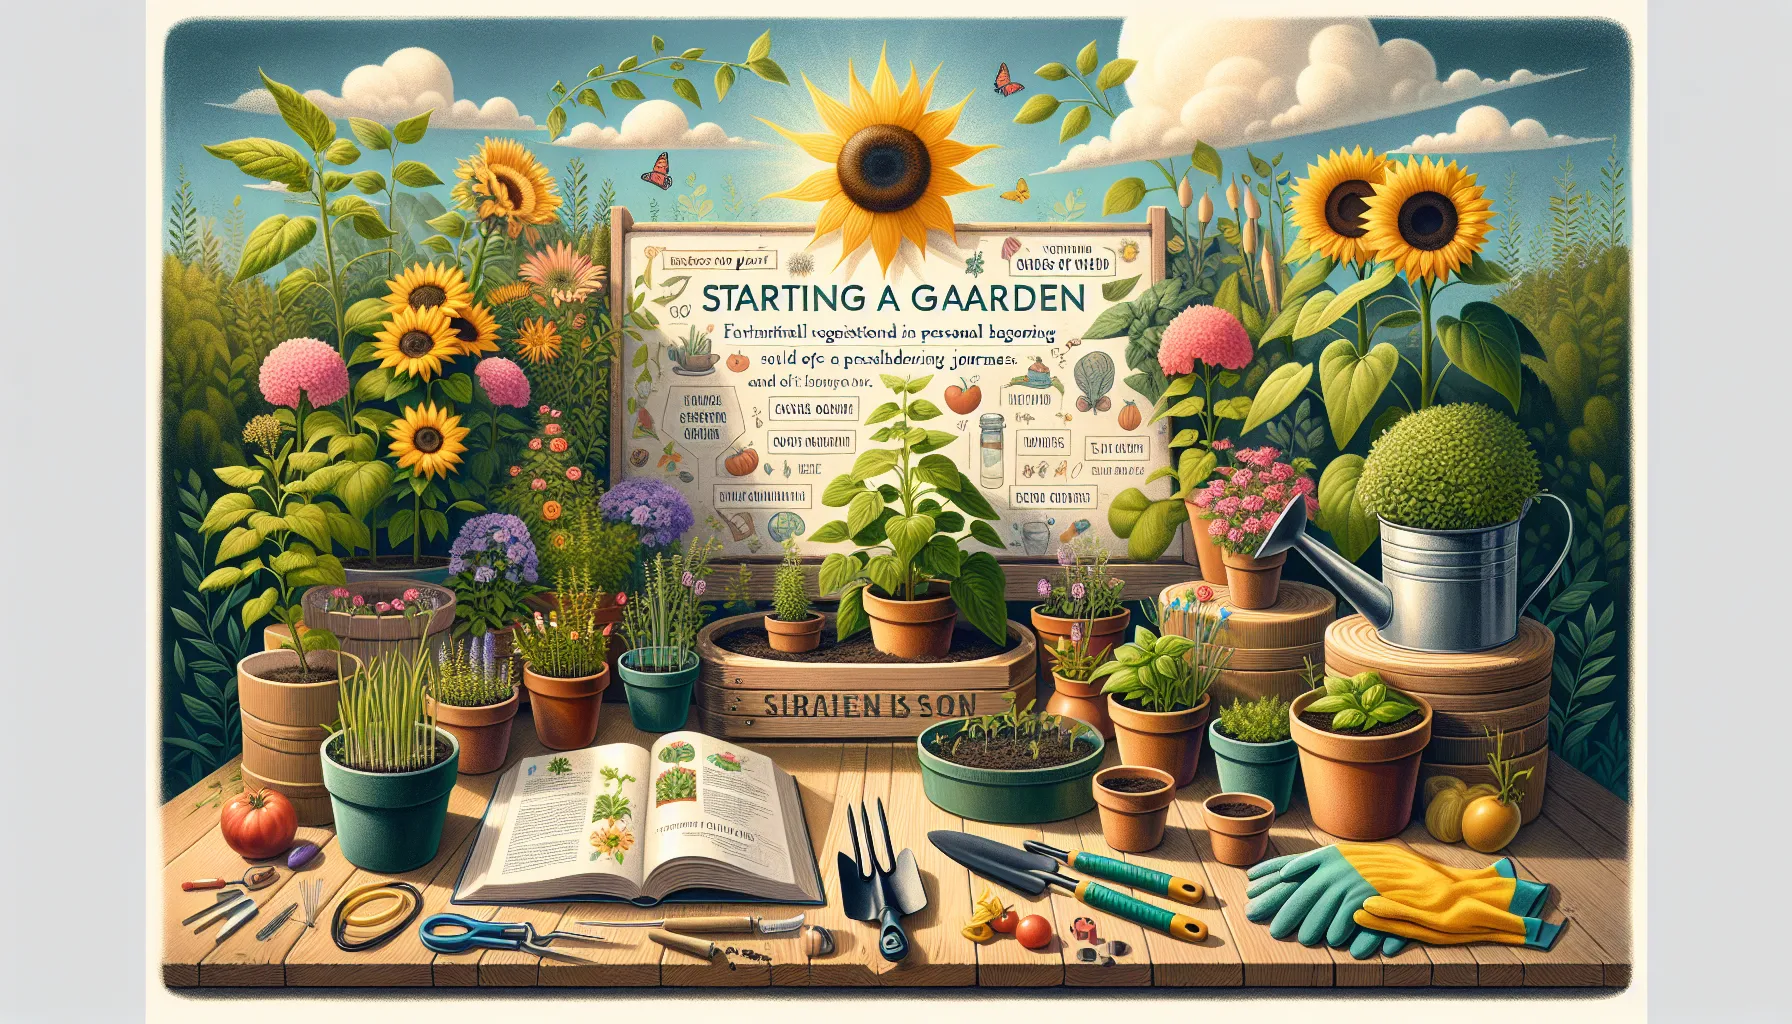 A colorful illustration showing a variety of gardening tools, plants, and a "Starting a Garden" guidebook, themed around gardening for beginners.